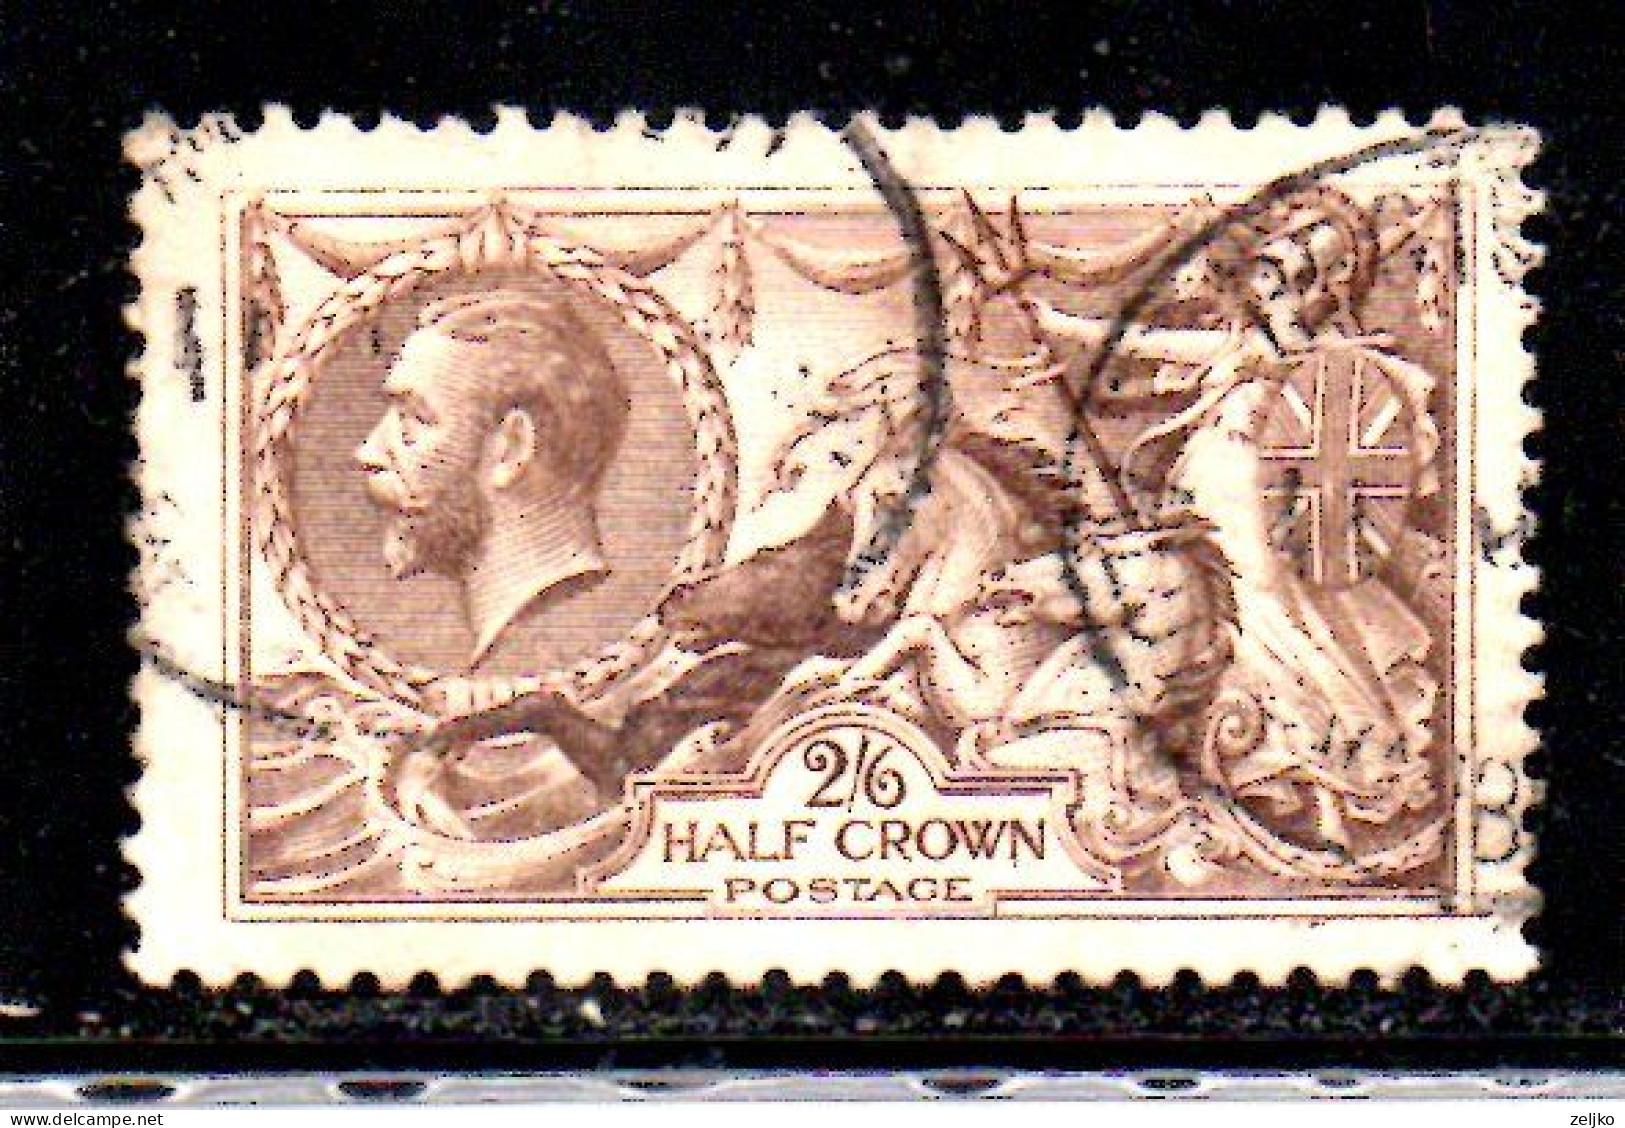 UK, GB, Great Britain, Used, 1918, Michel 141 III,height 22 1_2, George V, Seahorse, (M) - Oblitérés